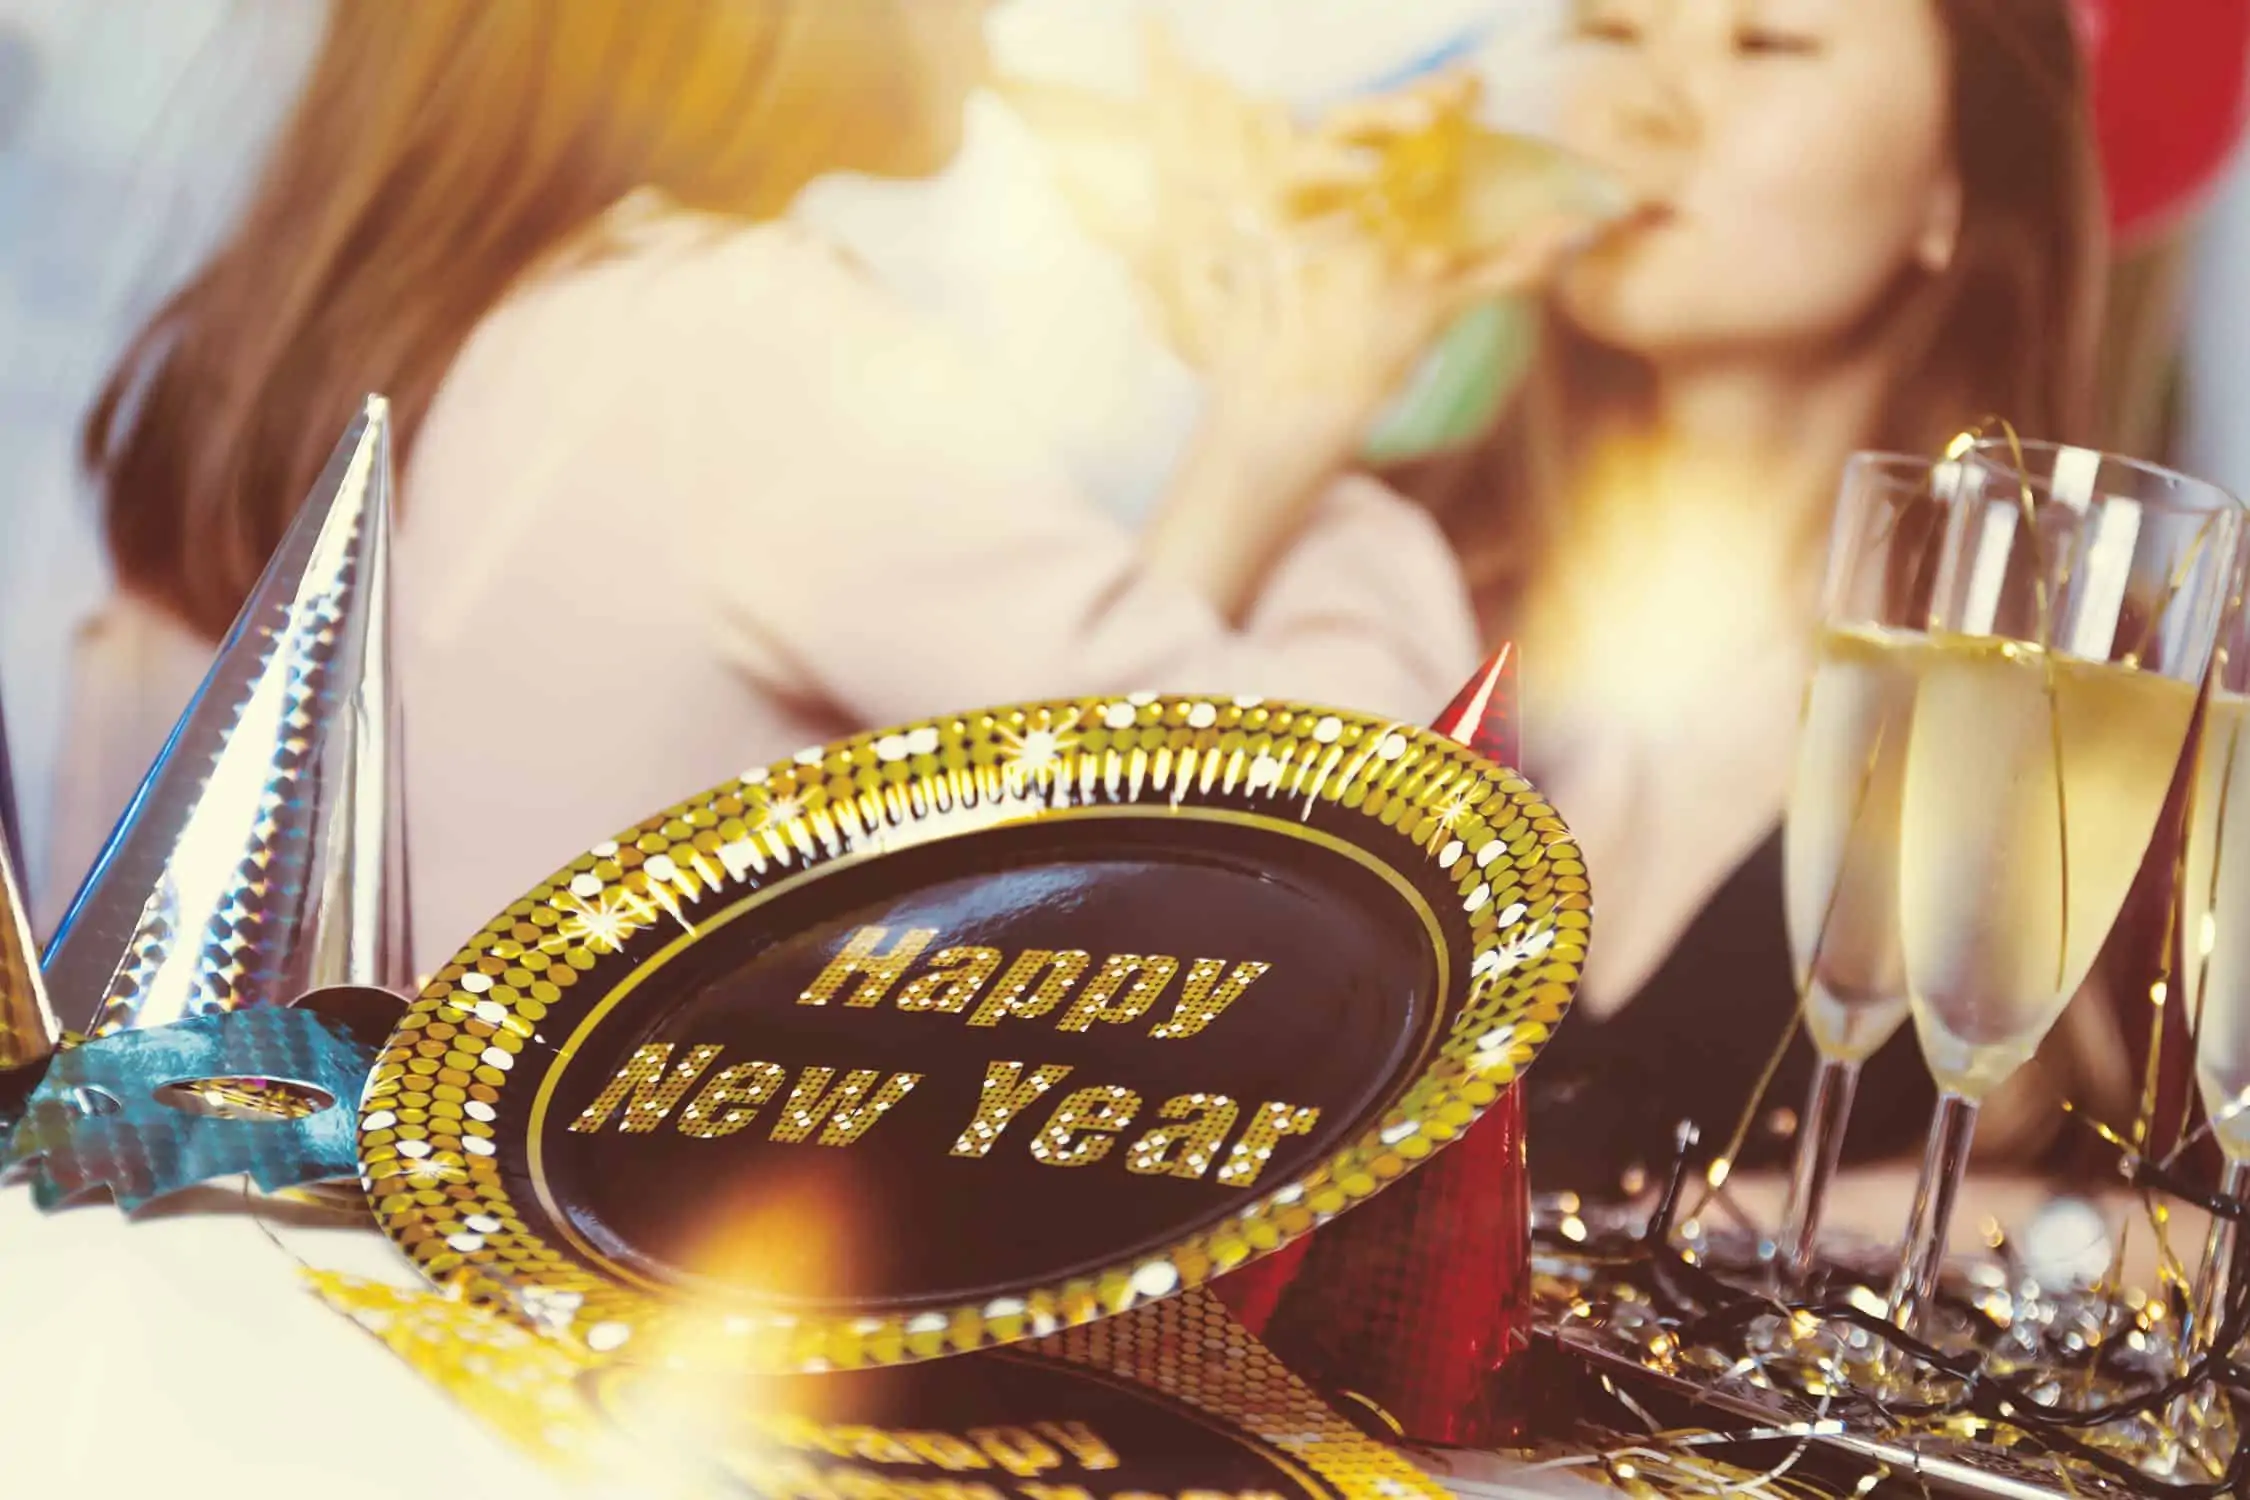 stock image showing a new years eve celebration for the new year's eve ride promotion post on ridester.com